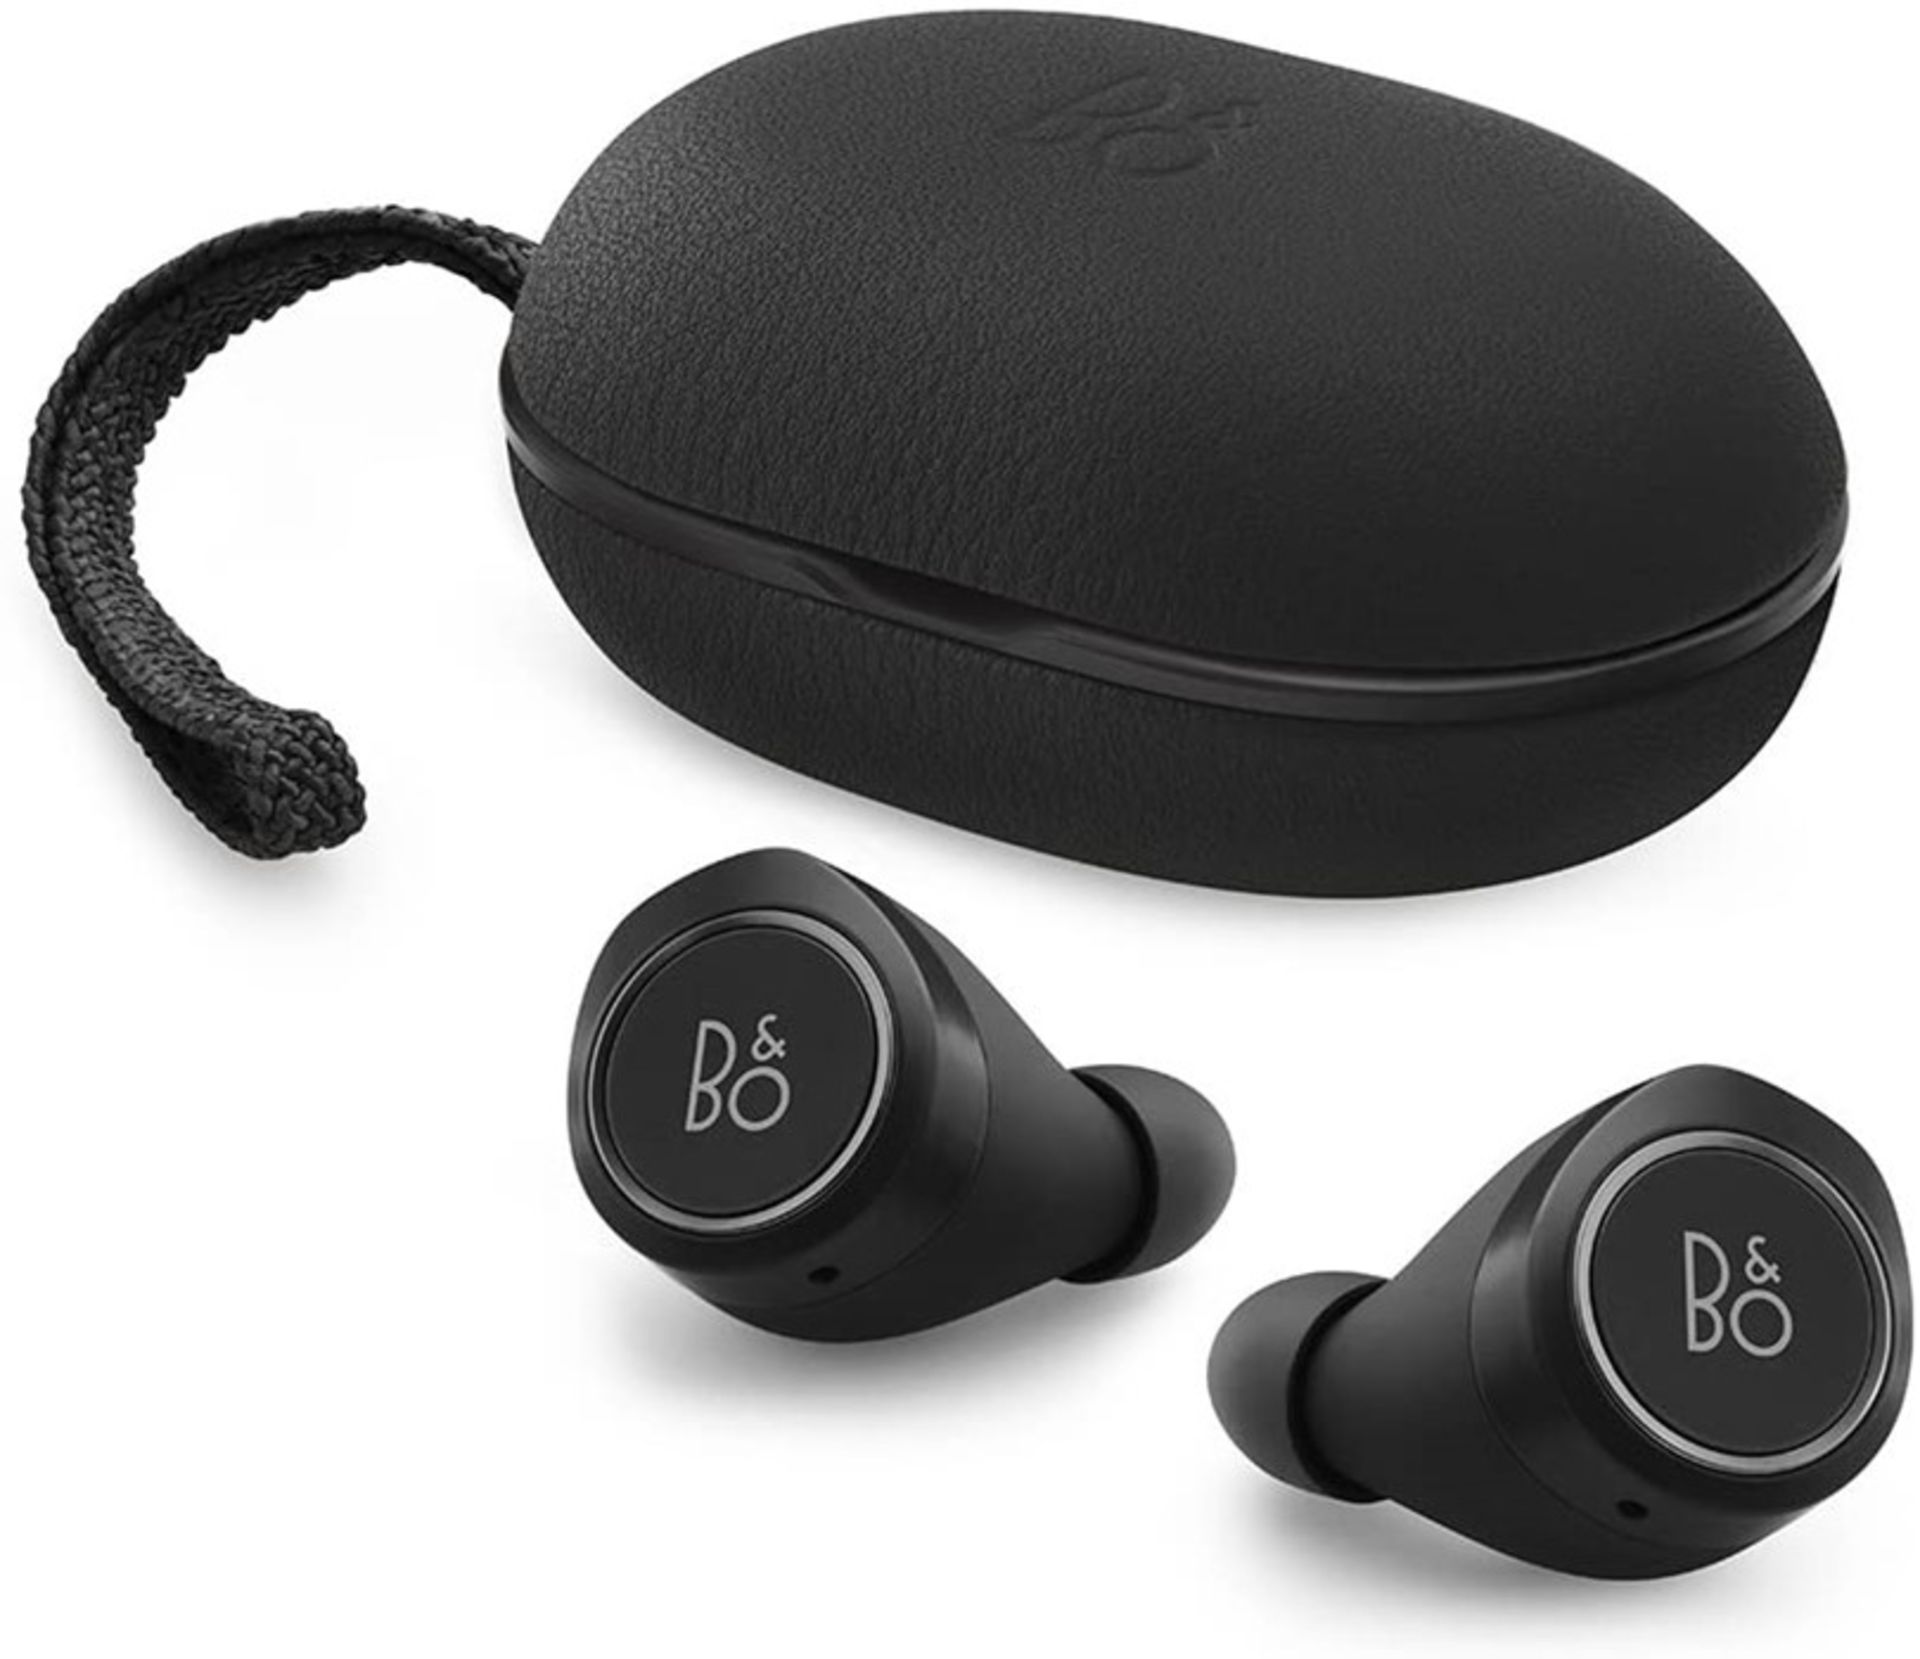 1 x set of Black Bang and Olufsen E8 wireless earphones, boxed and brand new, Collection - Image 3 of 3